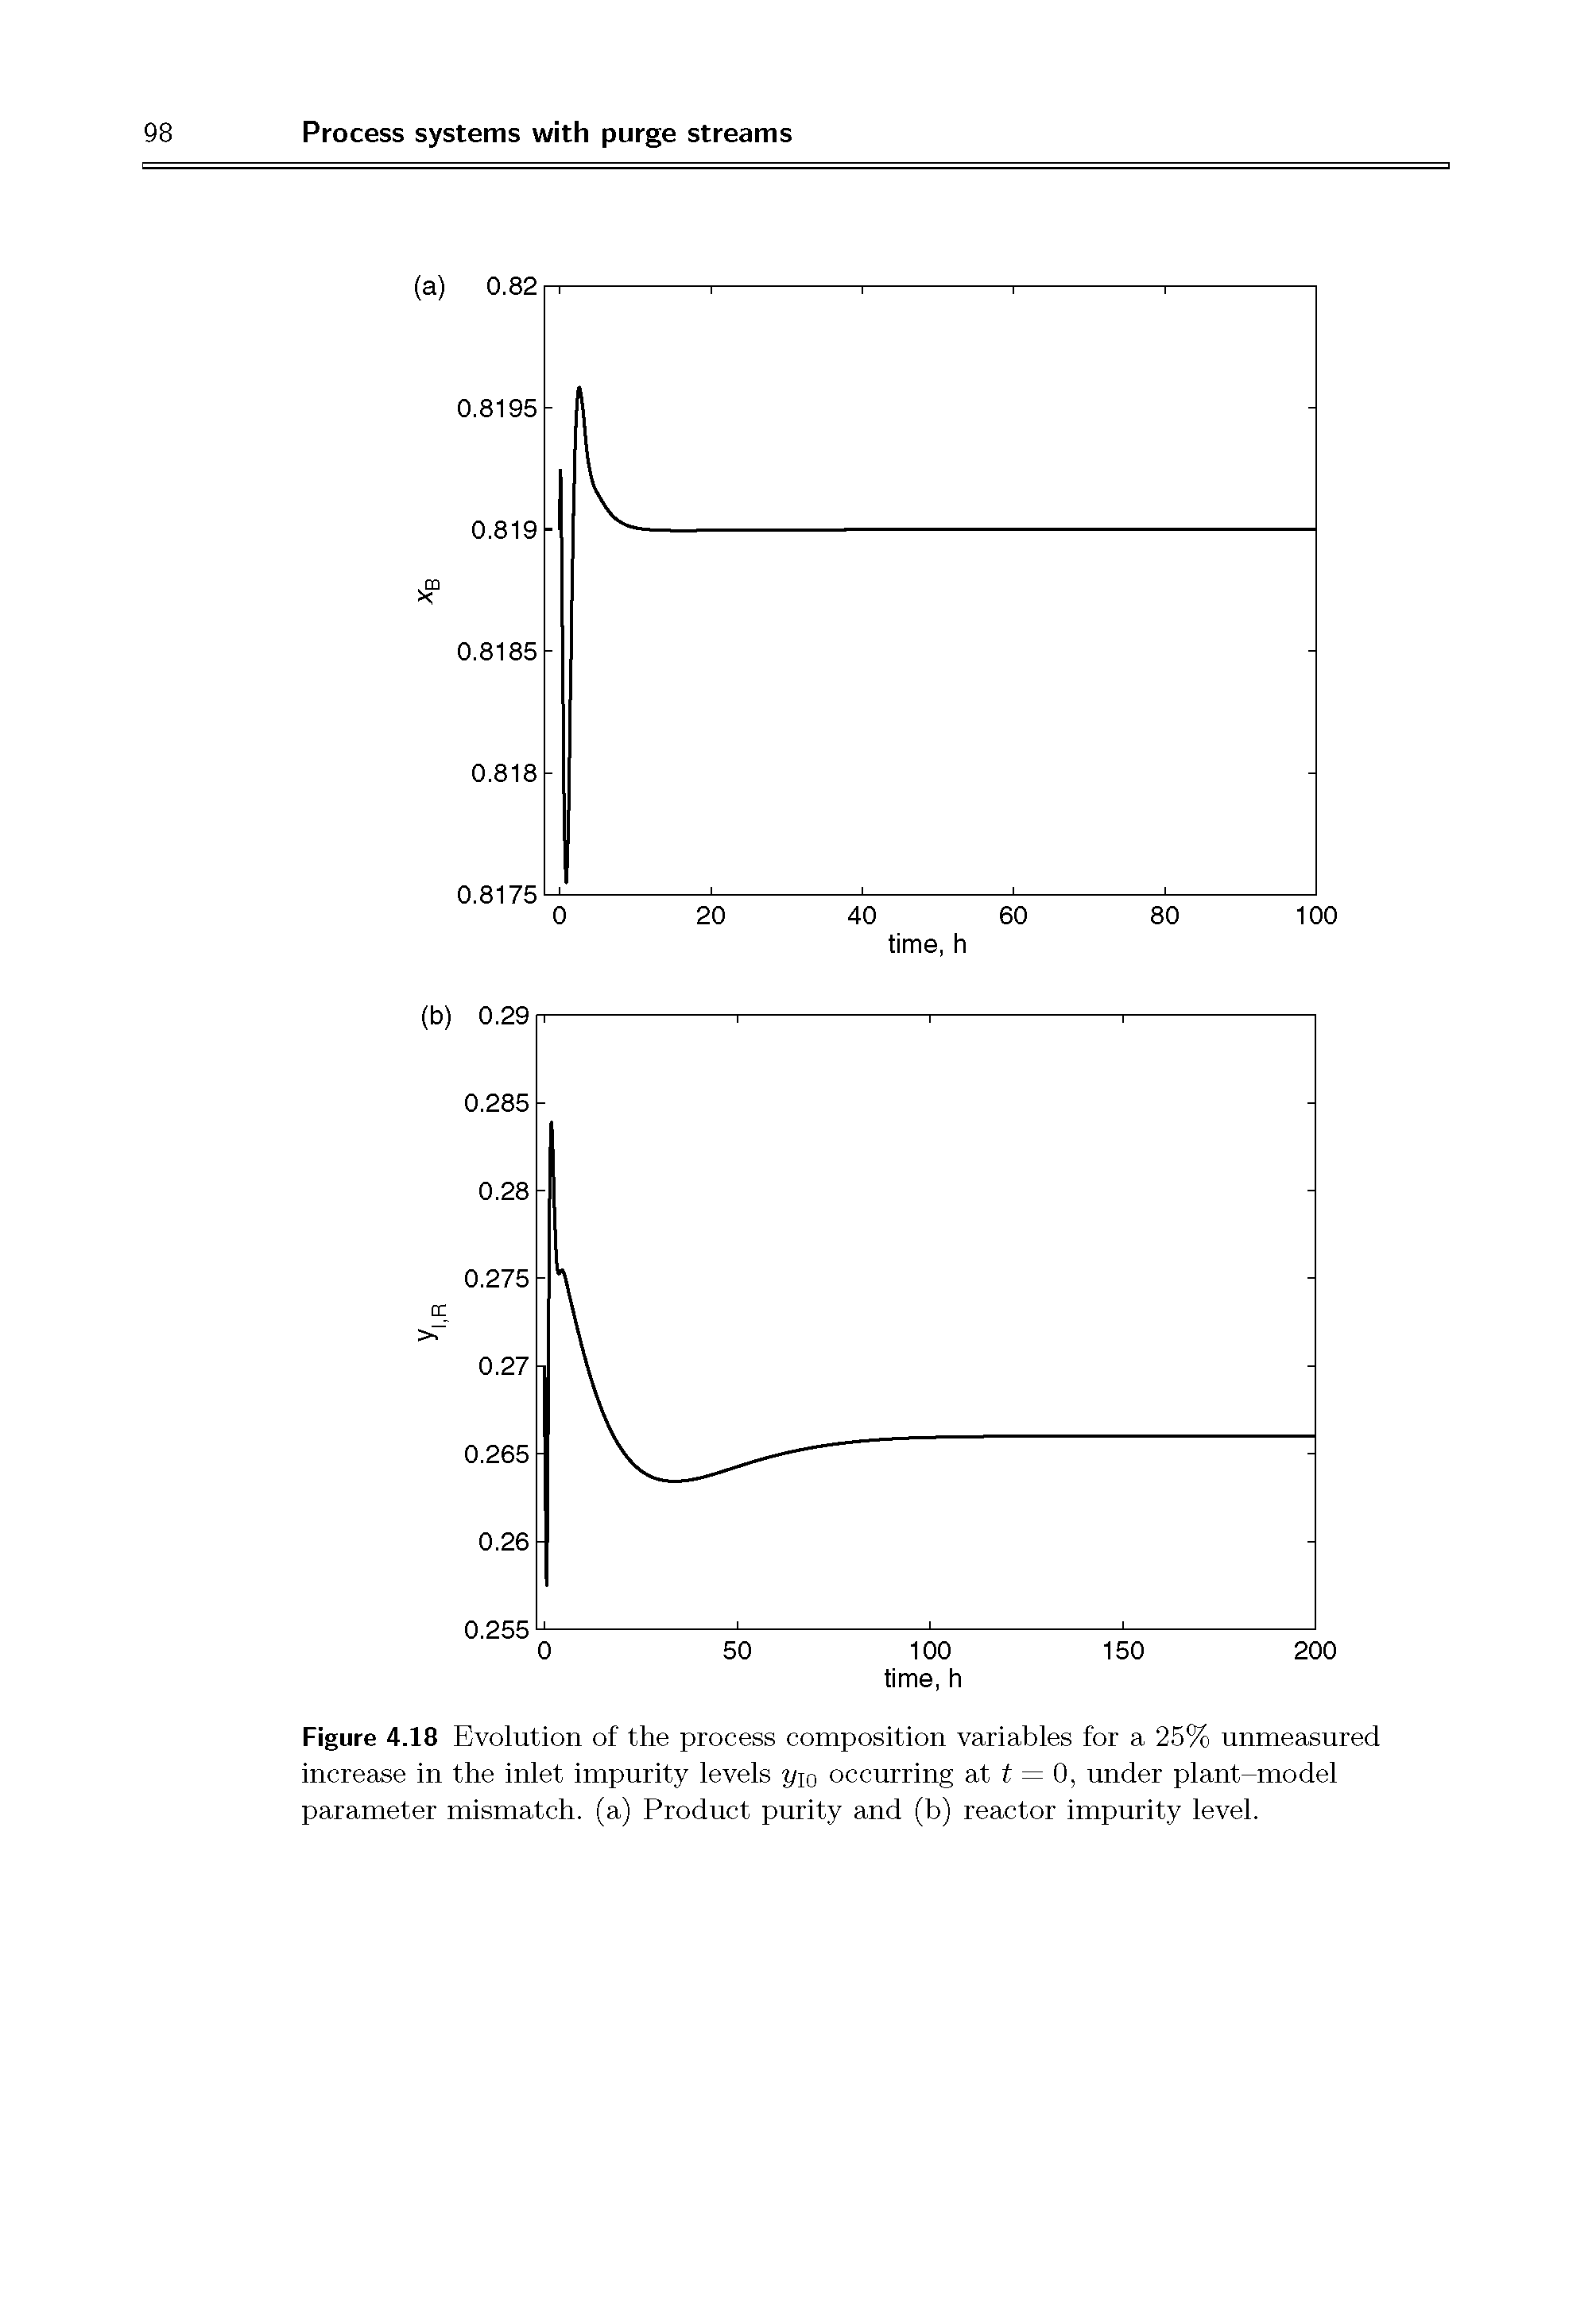 Figure 4.18 Evolution of the process composition variables for a 25% unmeasured increase in the inlet impurity levels y 0 occurring at t = 0, under plant-model parameter mismatch, (a) Product purity and (b) reactor impurity level.